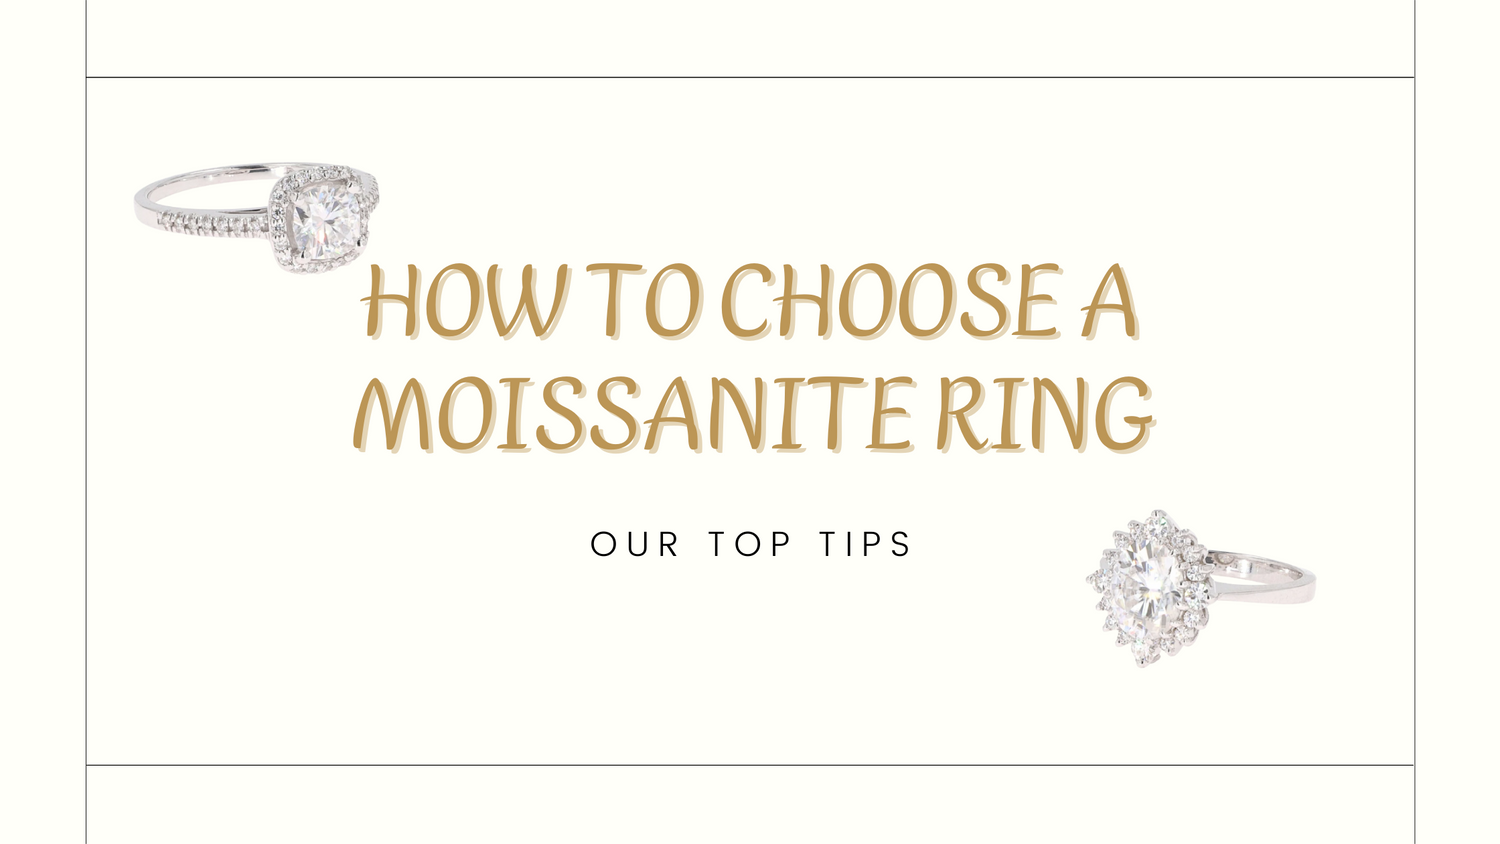 How To Choose a Moissanite Ring: Our Top Tips